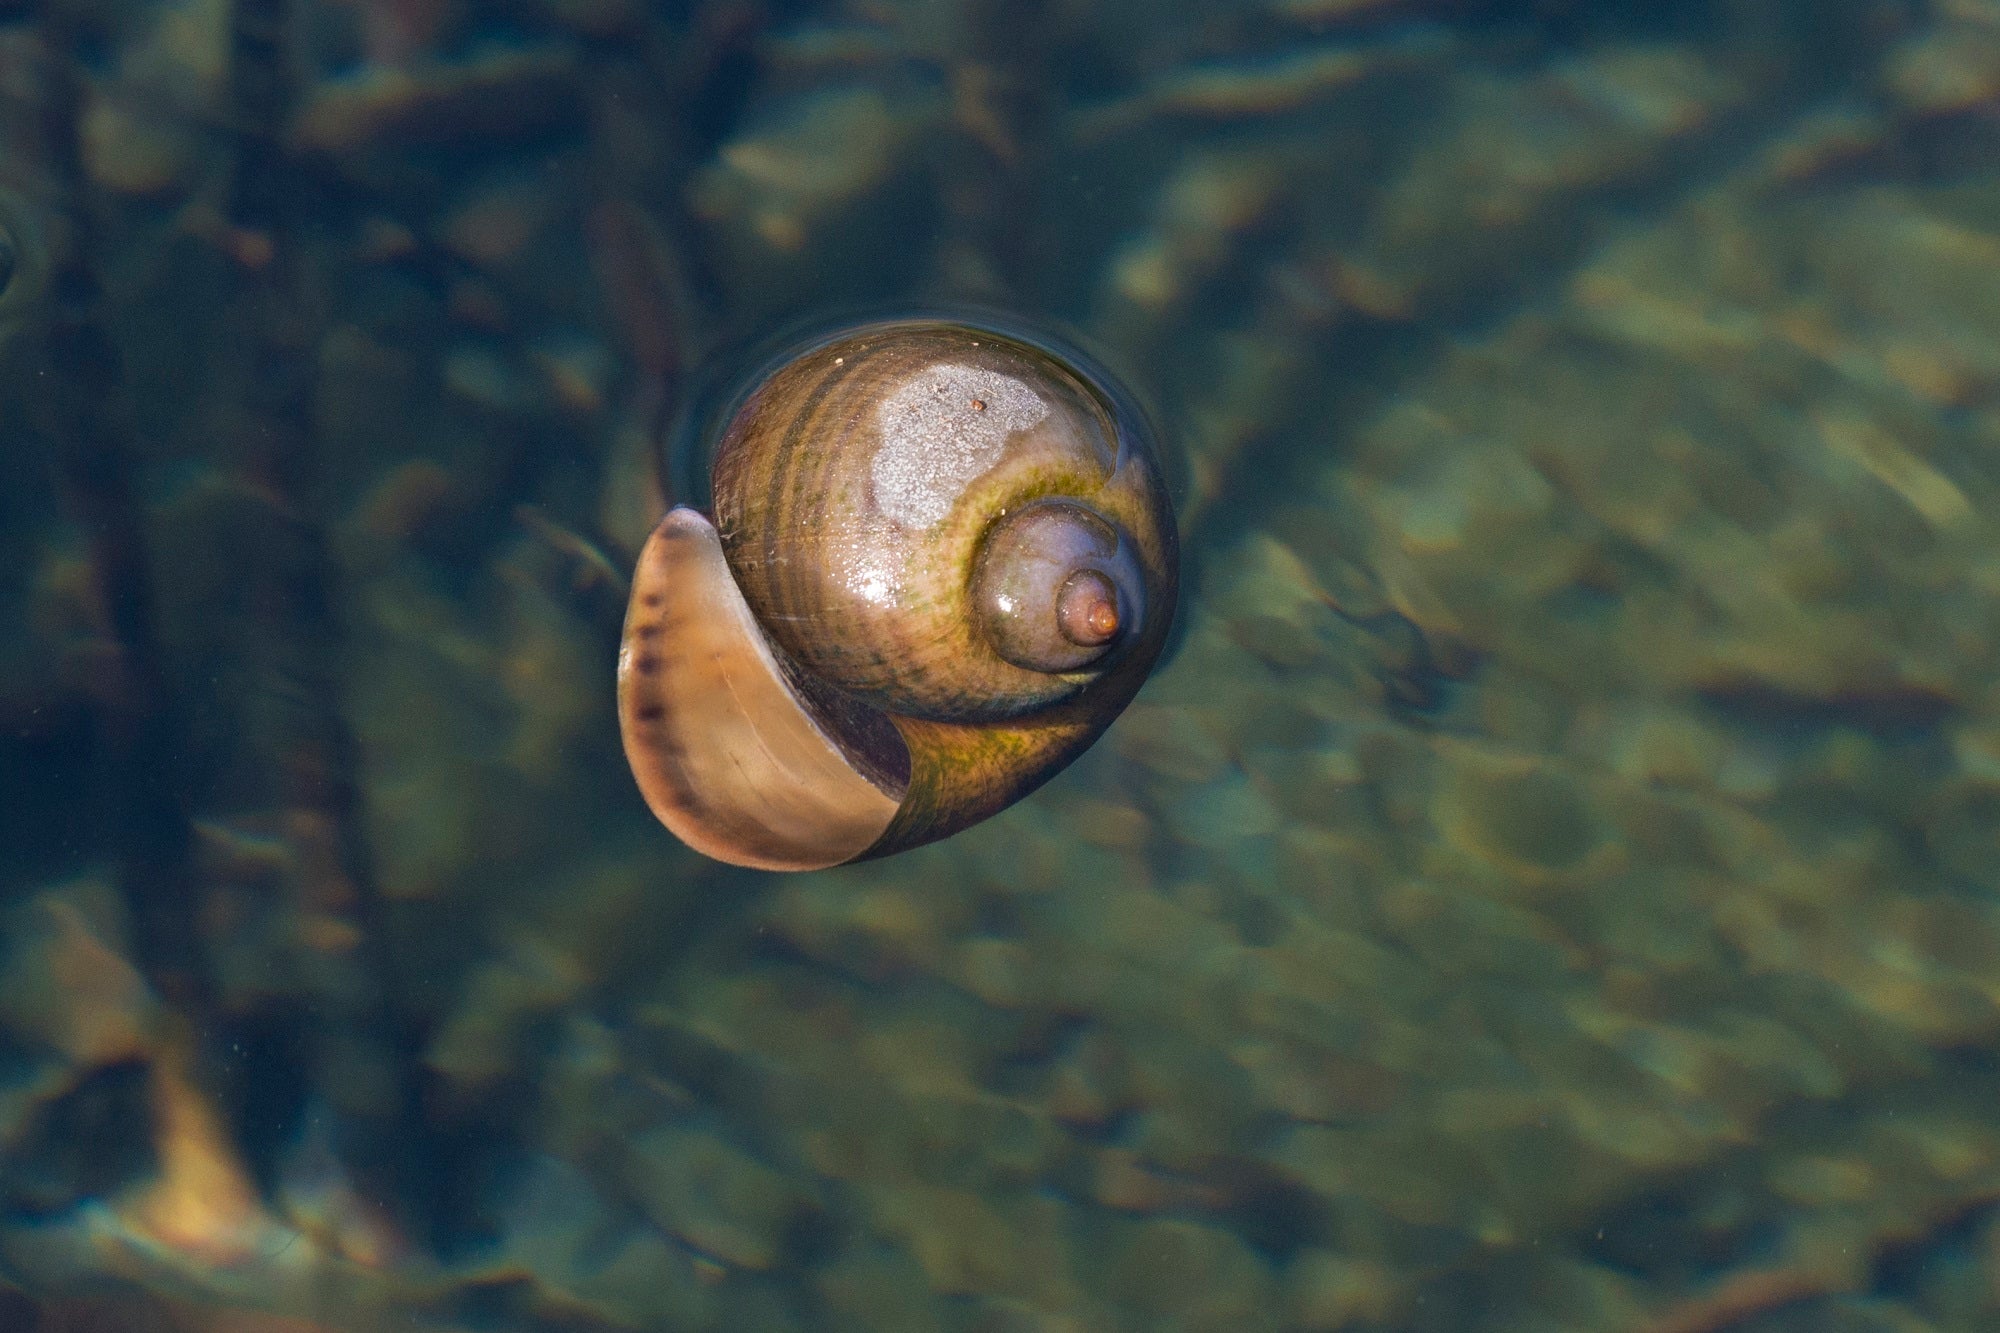 Exotic apple snail in water